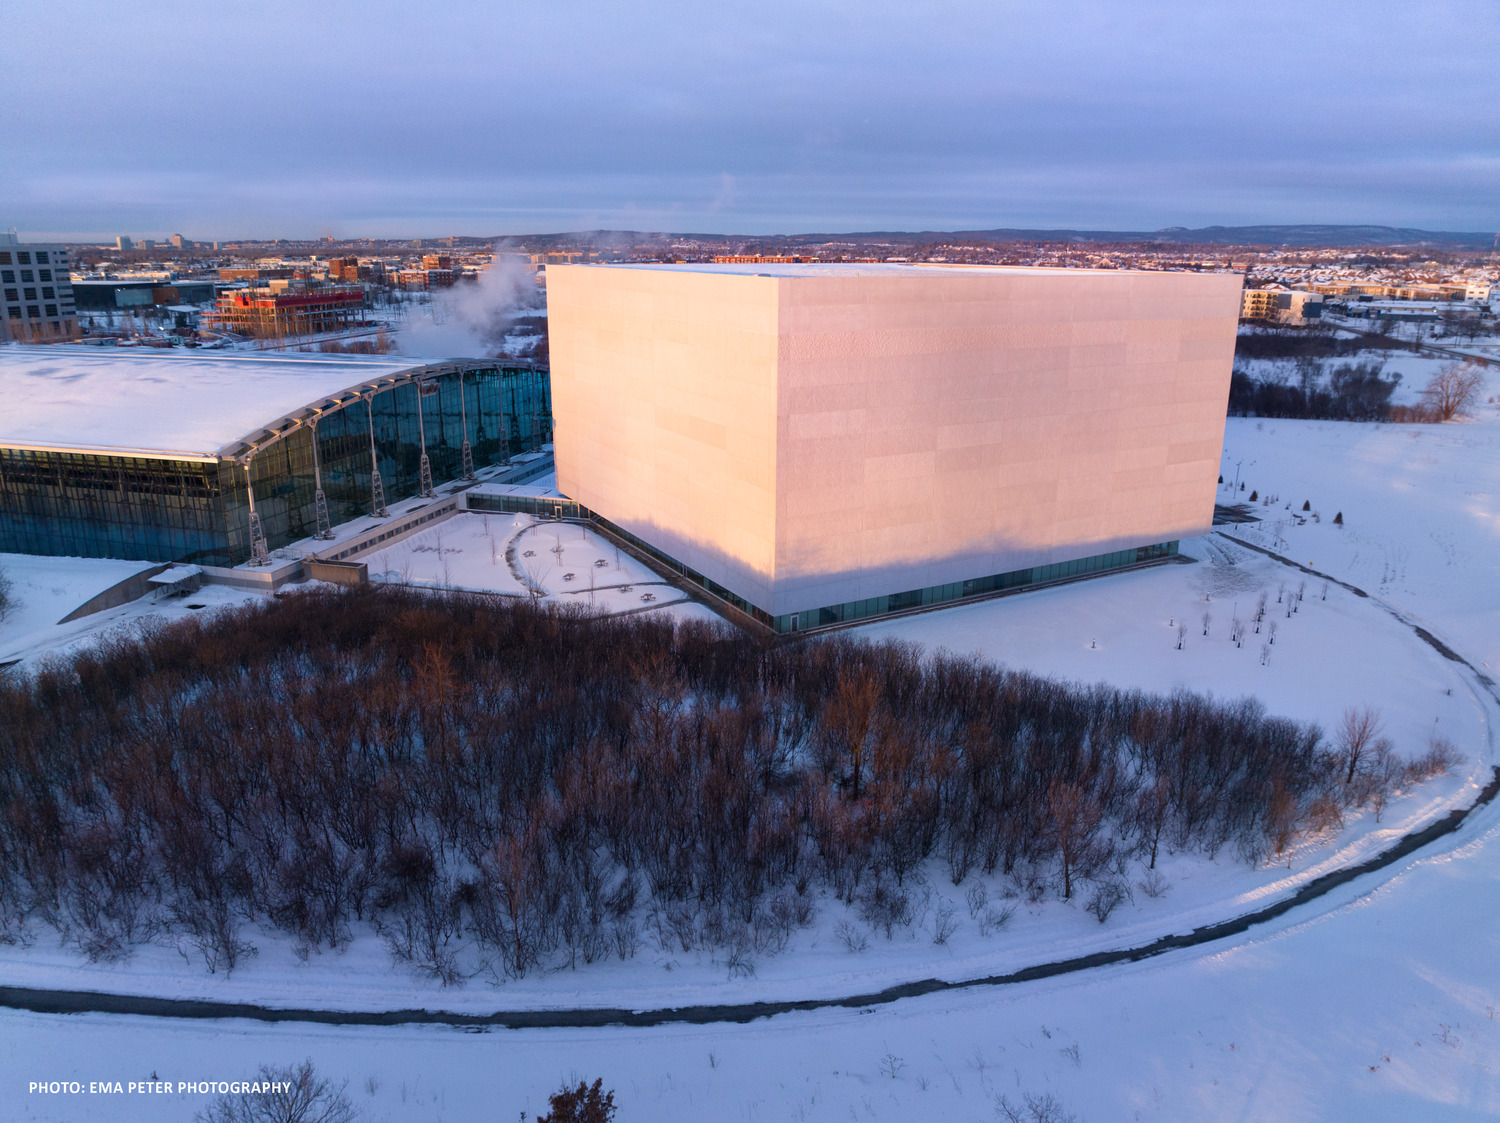 Aerial view of a large, modern building with a square design, surrounded by a snowy landscape at dusk, with city lights in the background.